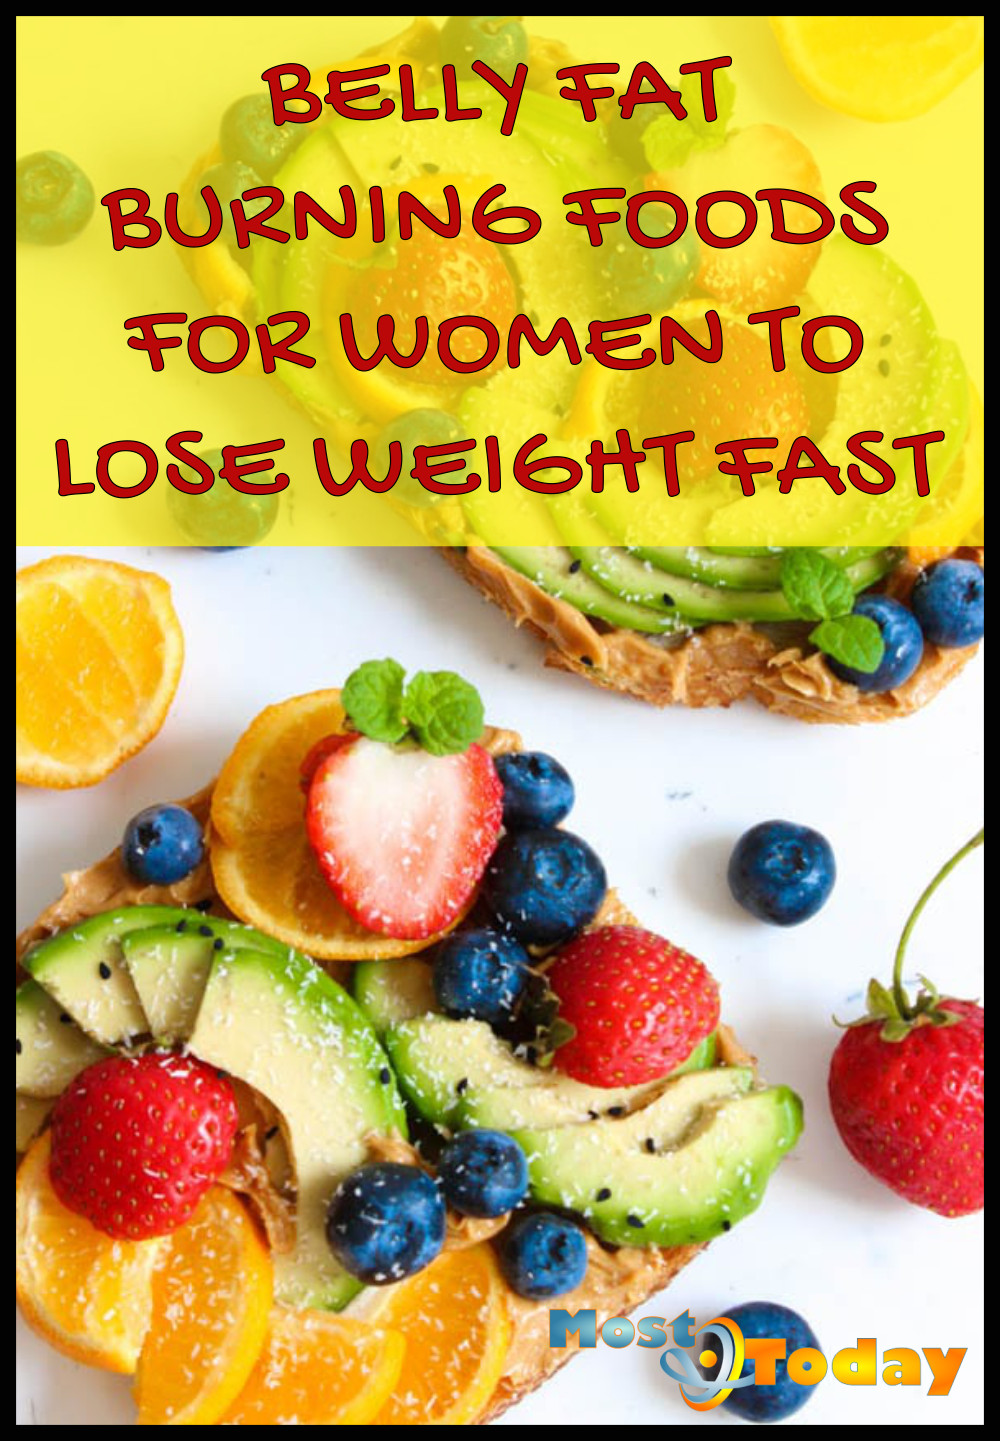 Fat Burning Foods Losing Weight Flat Belly
 BELLY FAT BURNING FOODS FOR WOMEN TO LOSE WEIGHT FAST